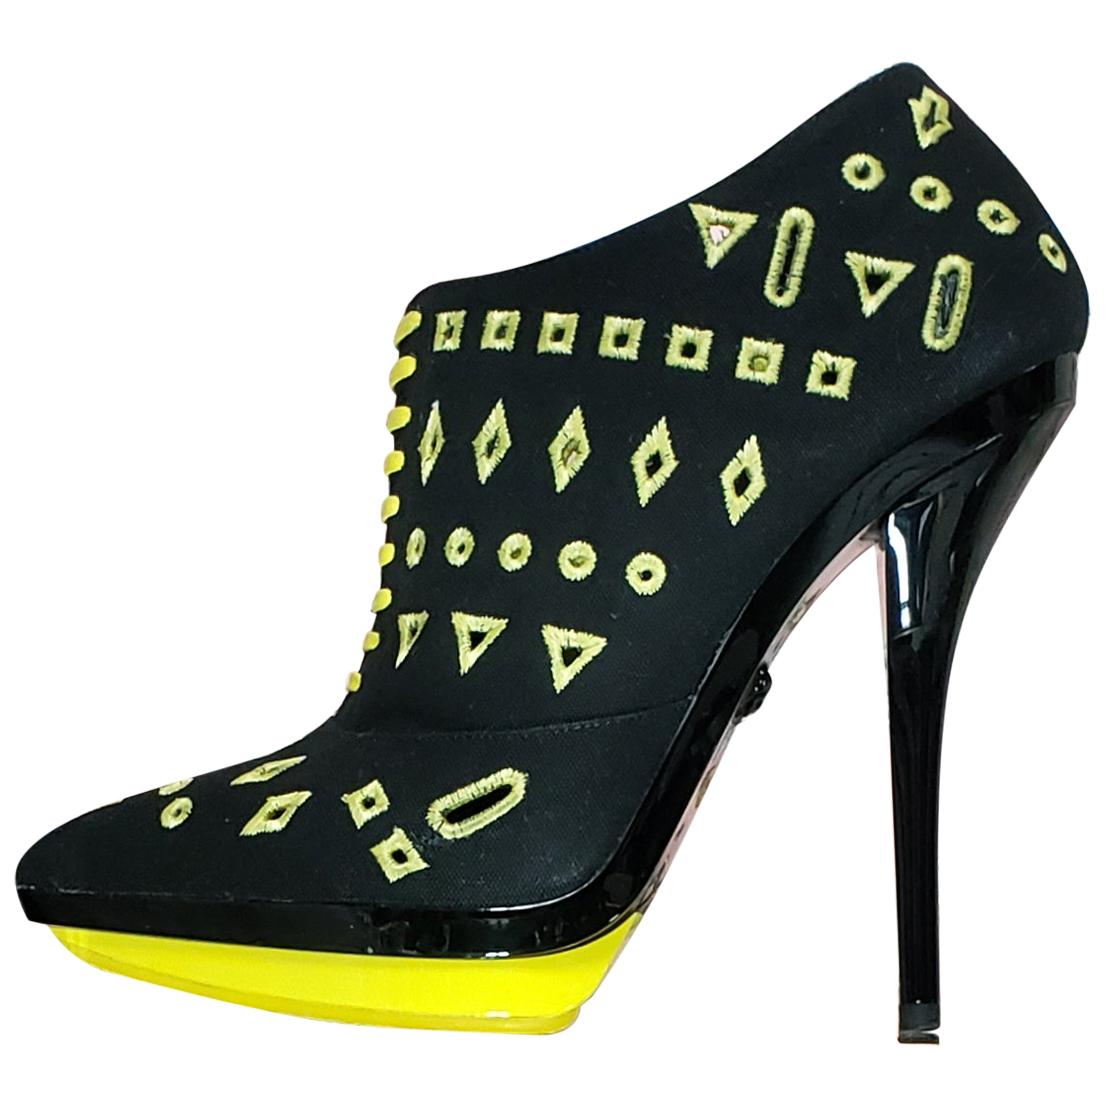 Resort 2012 look#13 VERSACE BLACK and YELLOW EYELET CANVAS PLATFORM SHOES Sz 10 For Sale